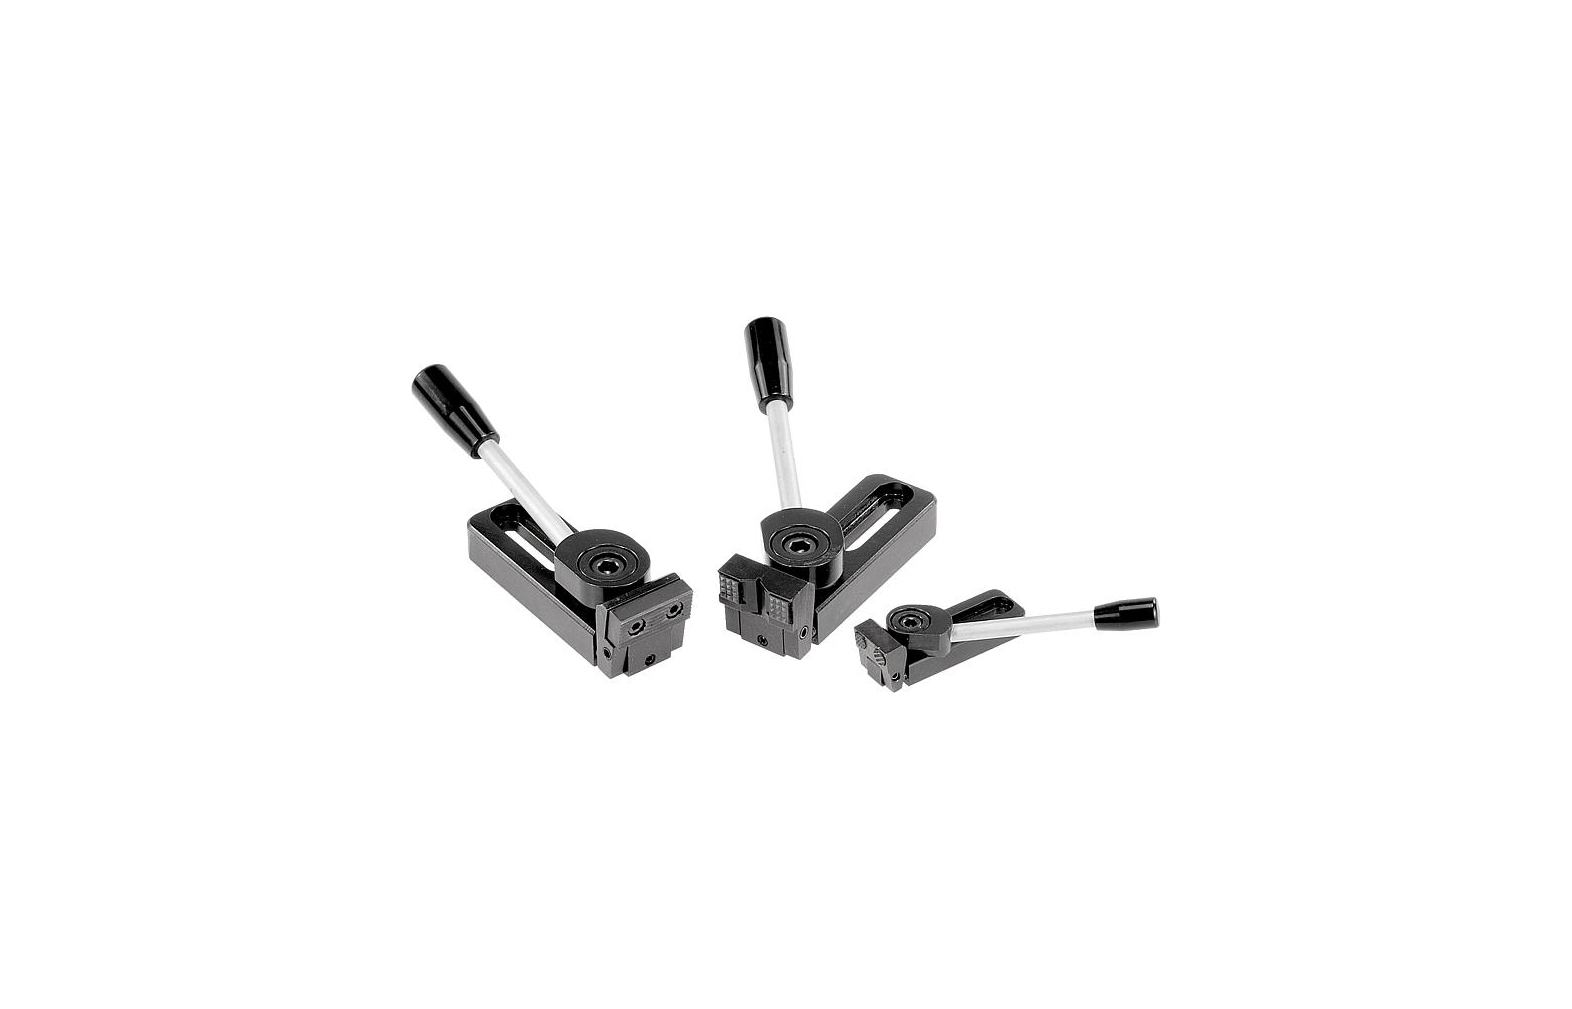 K0034 Side clamps